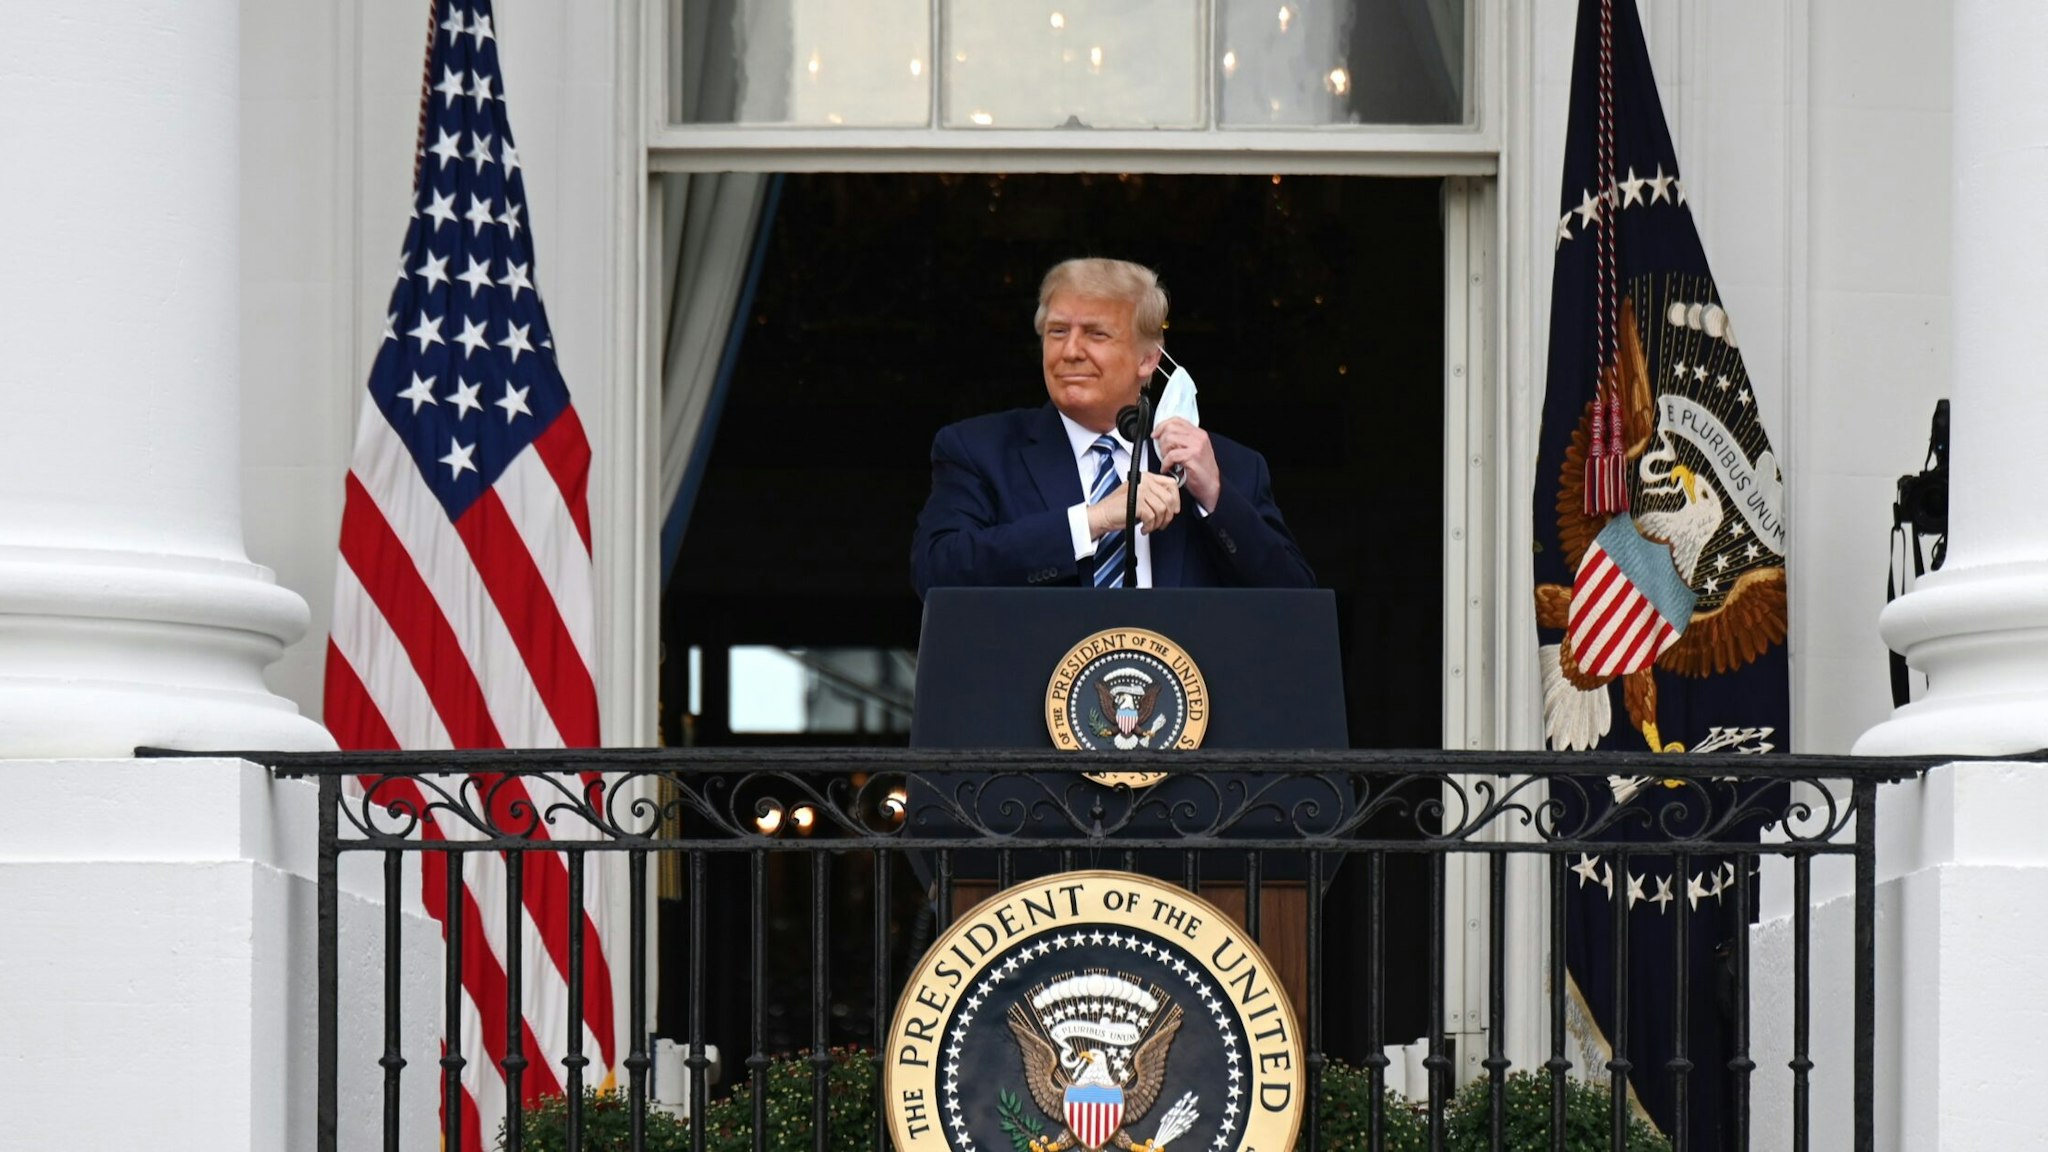 U.S. President Donald Trump removes a protective mask ahead of speaking from the Truman Balcony of the White House in Washington, D.C., U.S., on Saturday, Oct. 10, 2020. Trump, making his first public appearance since returning from a three-day hospitalization for Covid-19, is setting the stage for a return to the campaign trail even as questions remain about whether hes still contagious. Photographer: